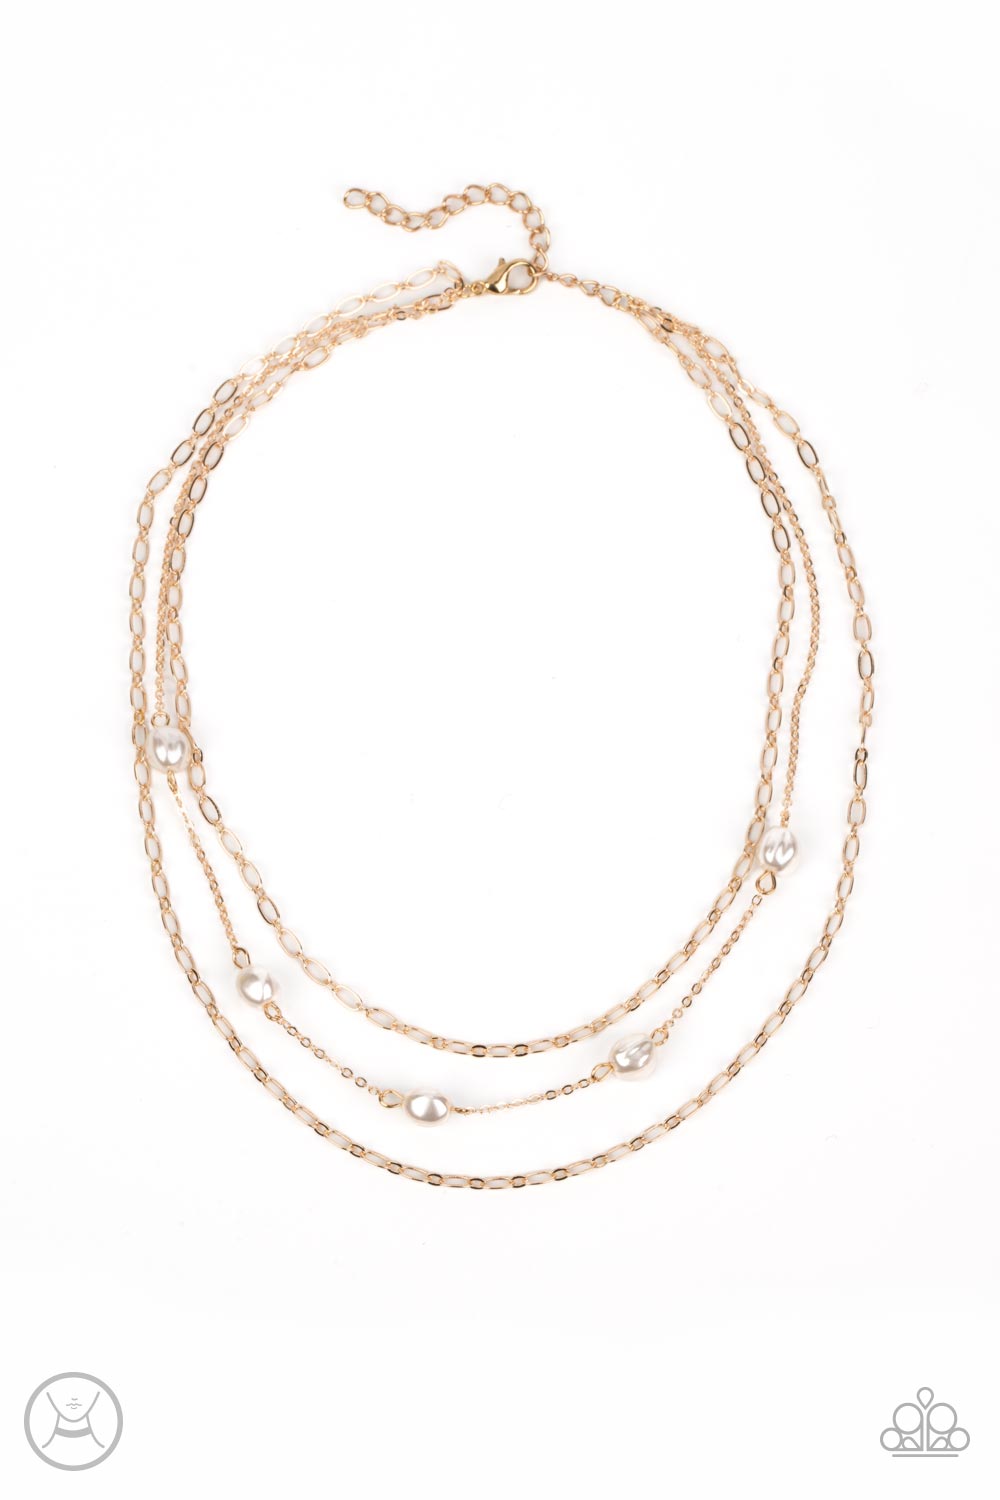 Offshore Oasis - gold - Paparazzi necklace